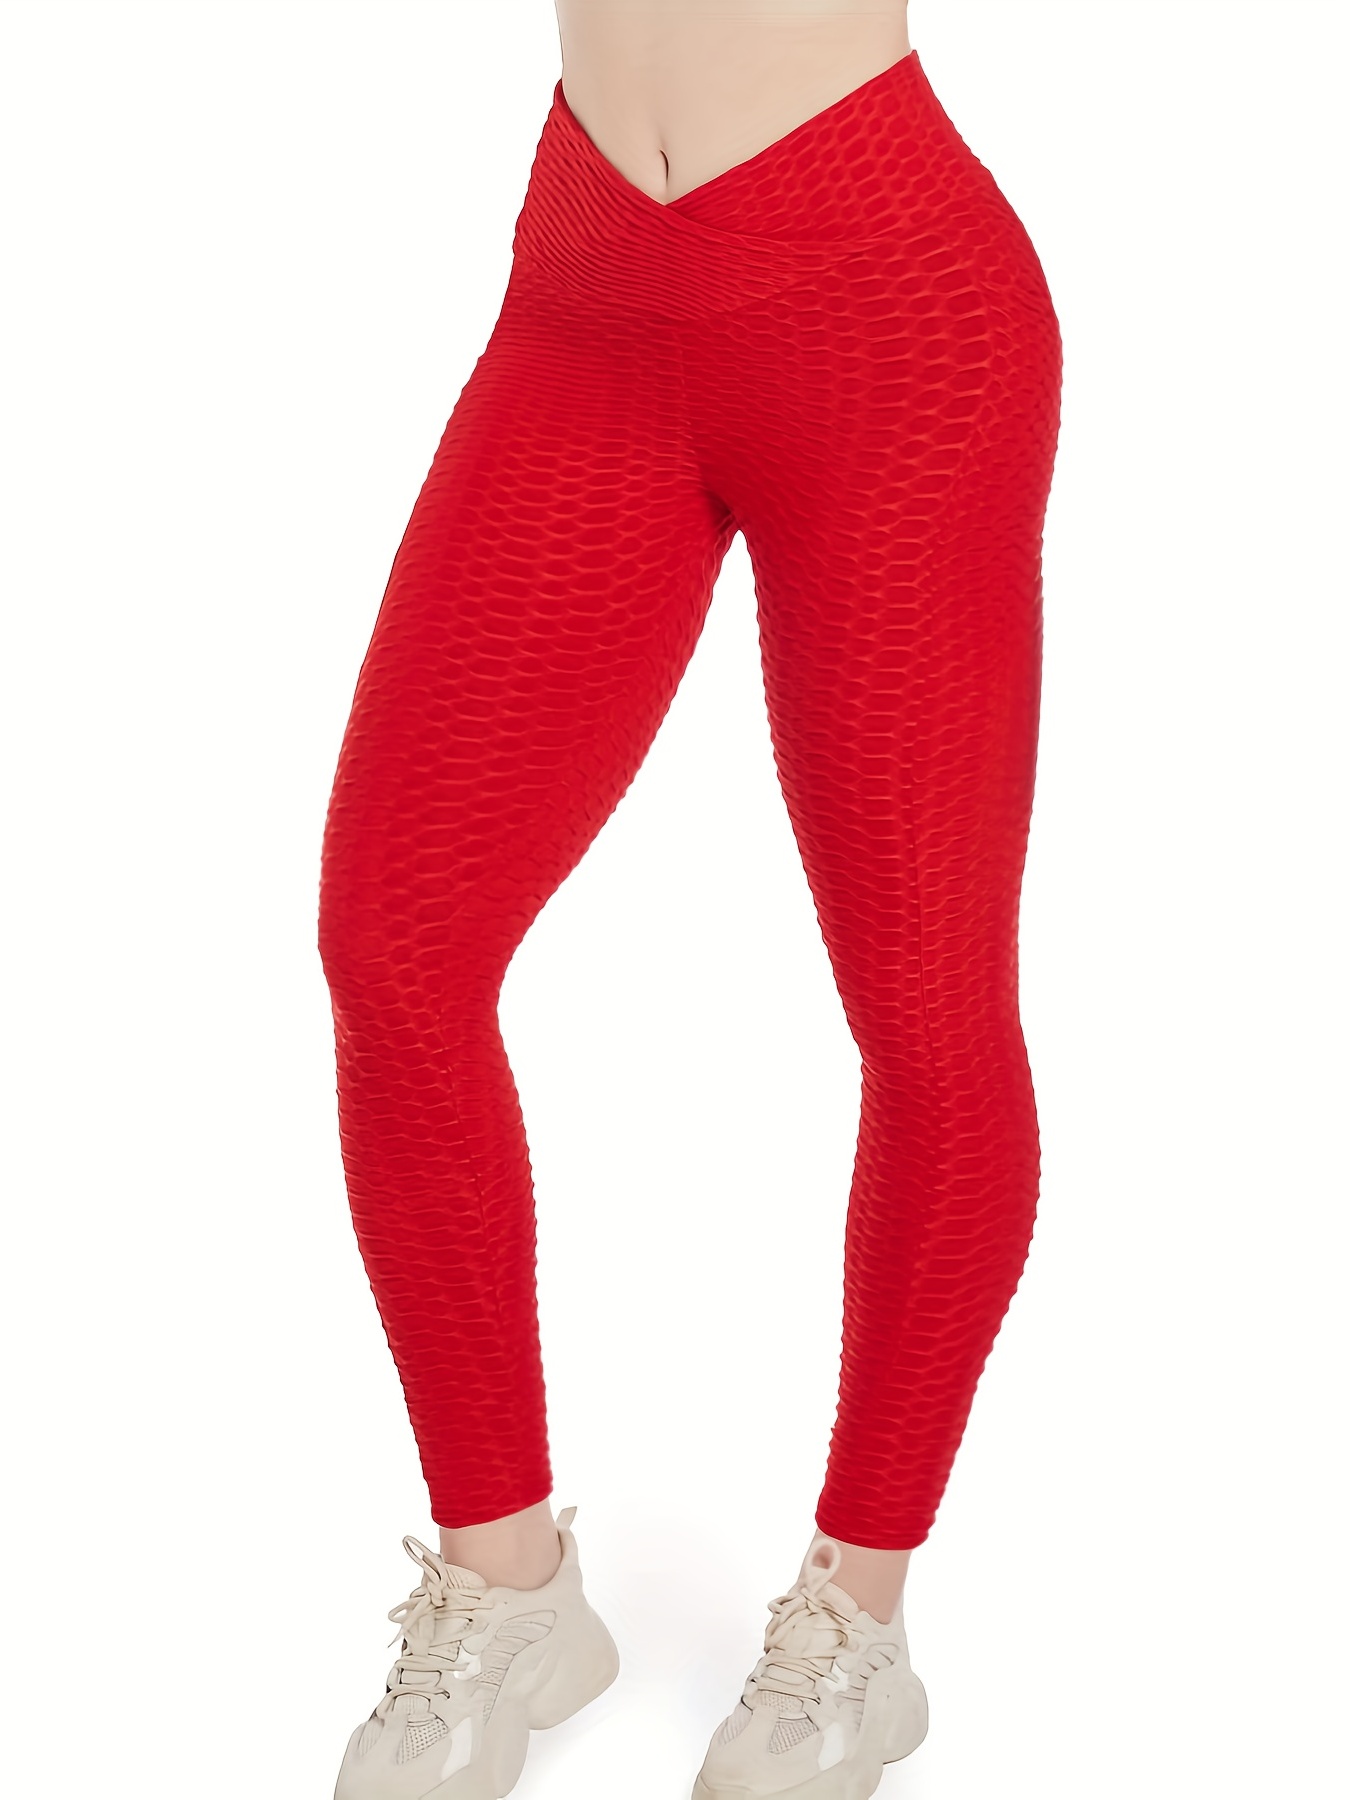 Runched Butt-lifting Leggings High-waisted Anti-cellulite Yoga